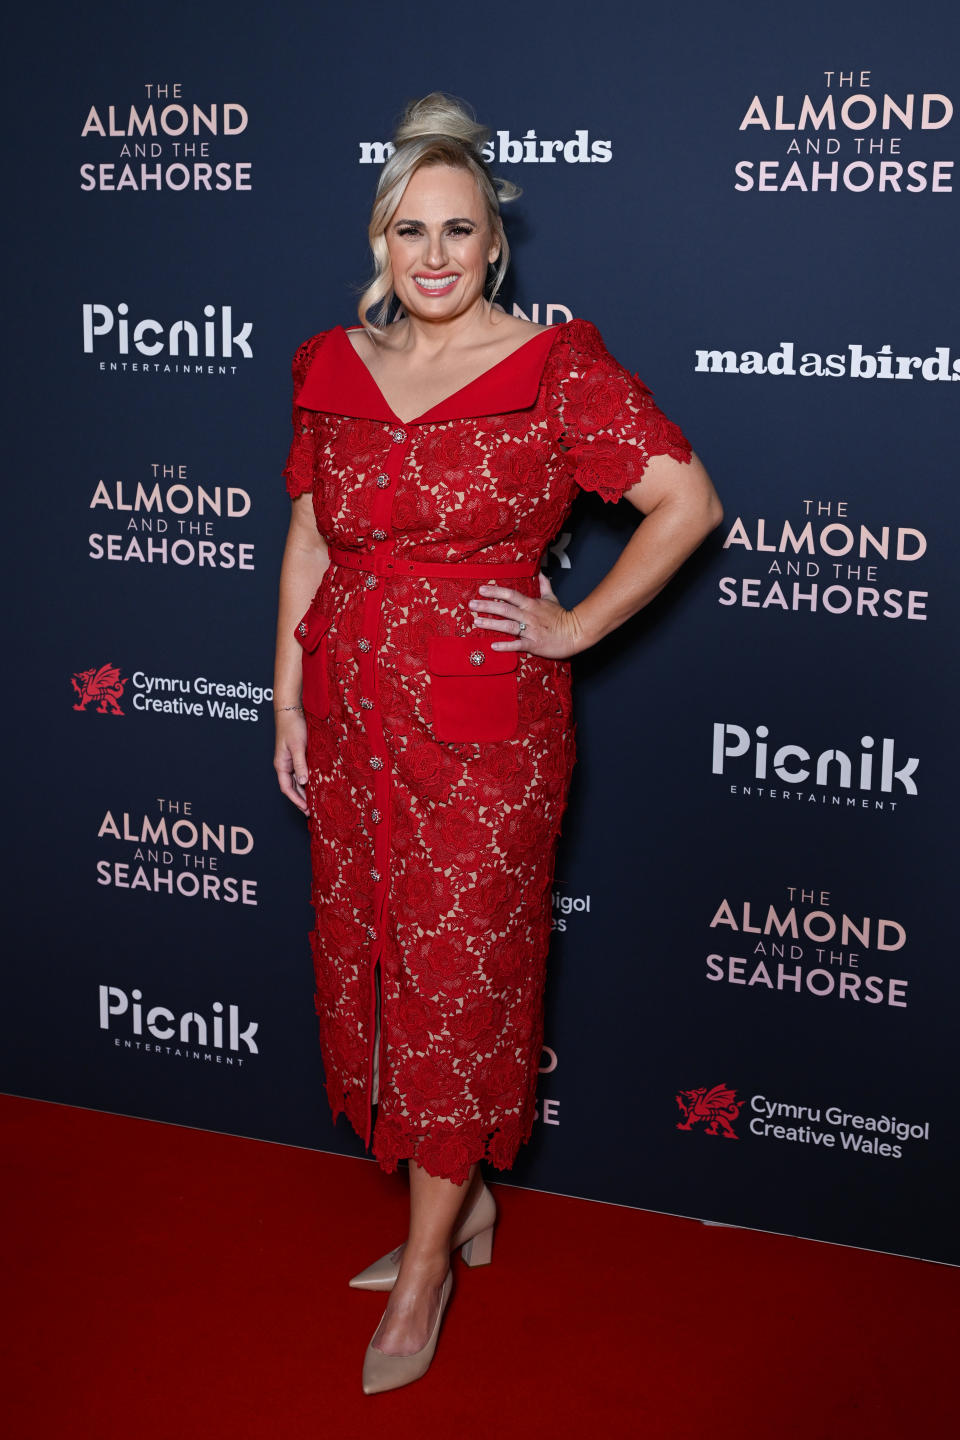 Rebel Wilson attends the UK premiere of "The Almond And The Seahorse" in pointed-toe pumps.